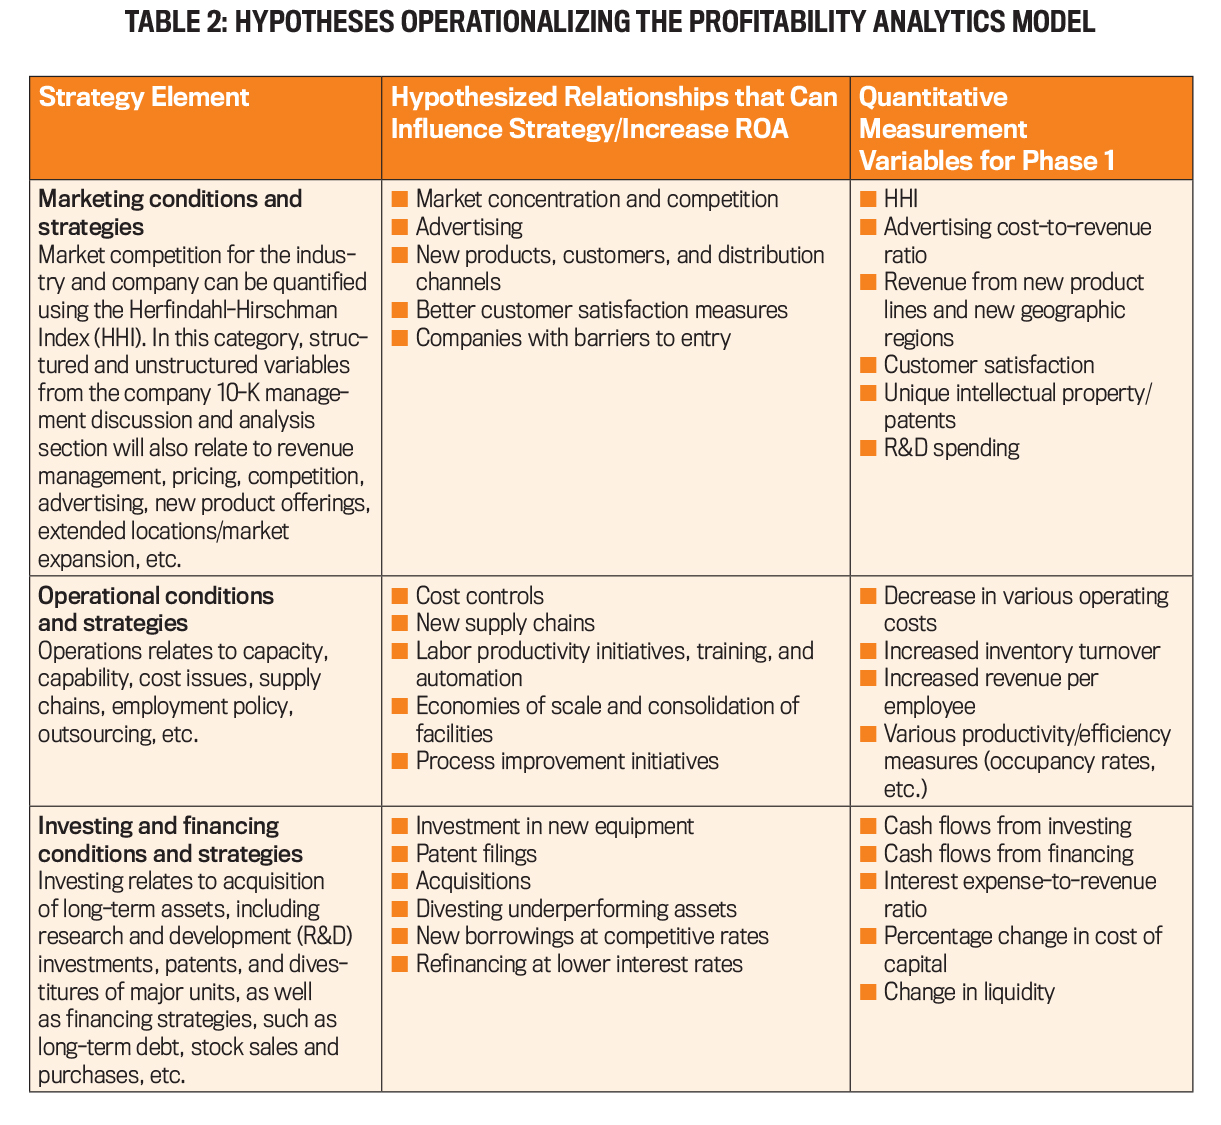 a table of hypotheses operationalizing the profitability analytics model